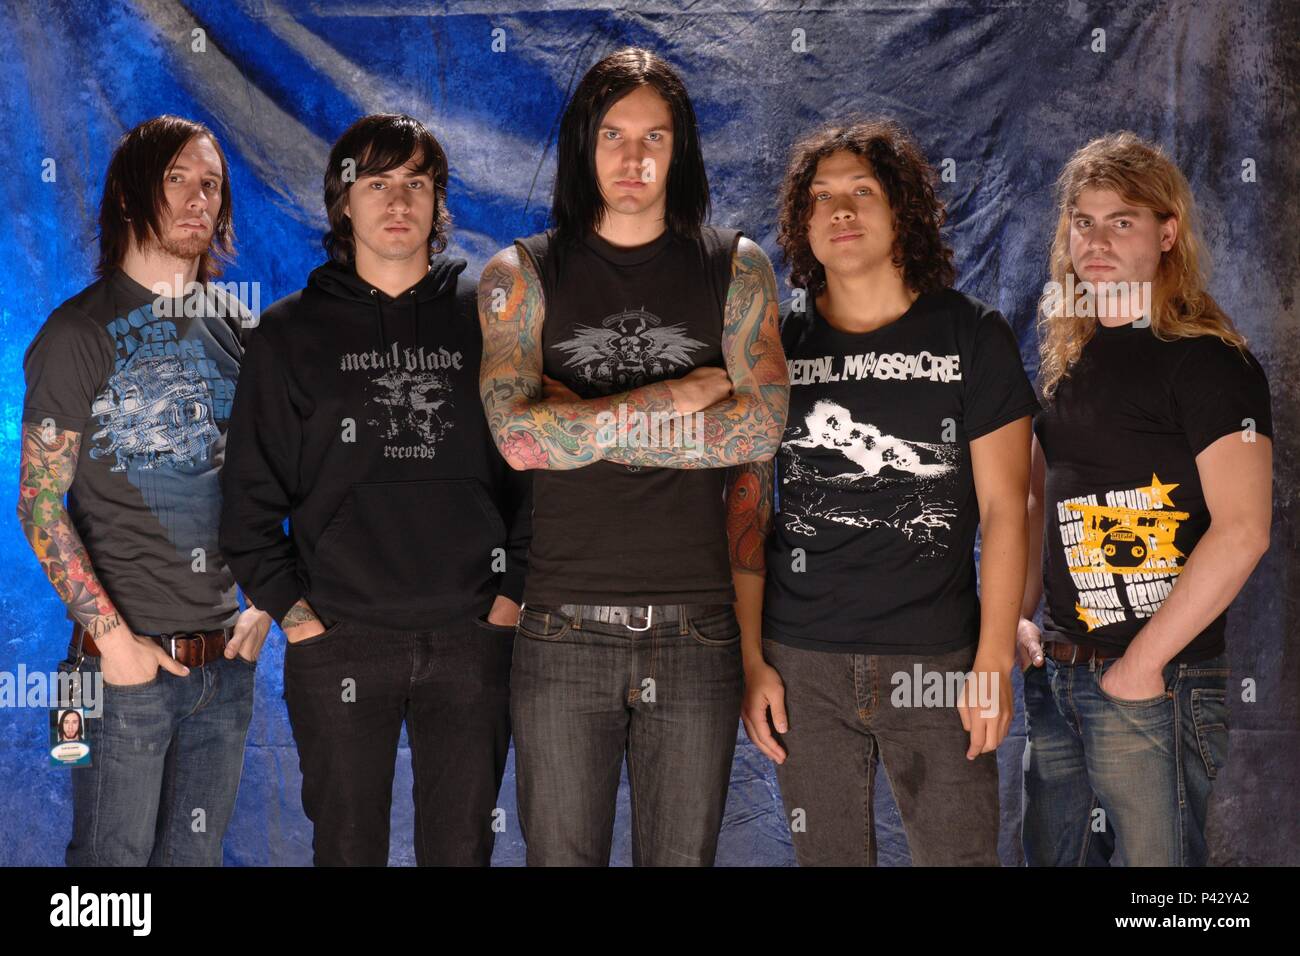 FILE PHOTO*** Tim Lambesis Reunites with As I Lay Dying bandmates after a tear after release in murder for hire conviction Portrait of the band As I Lay Dying photo shot